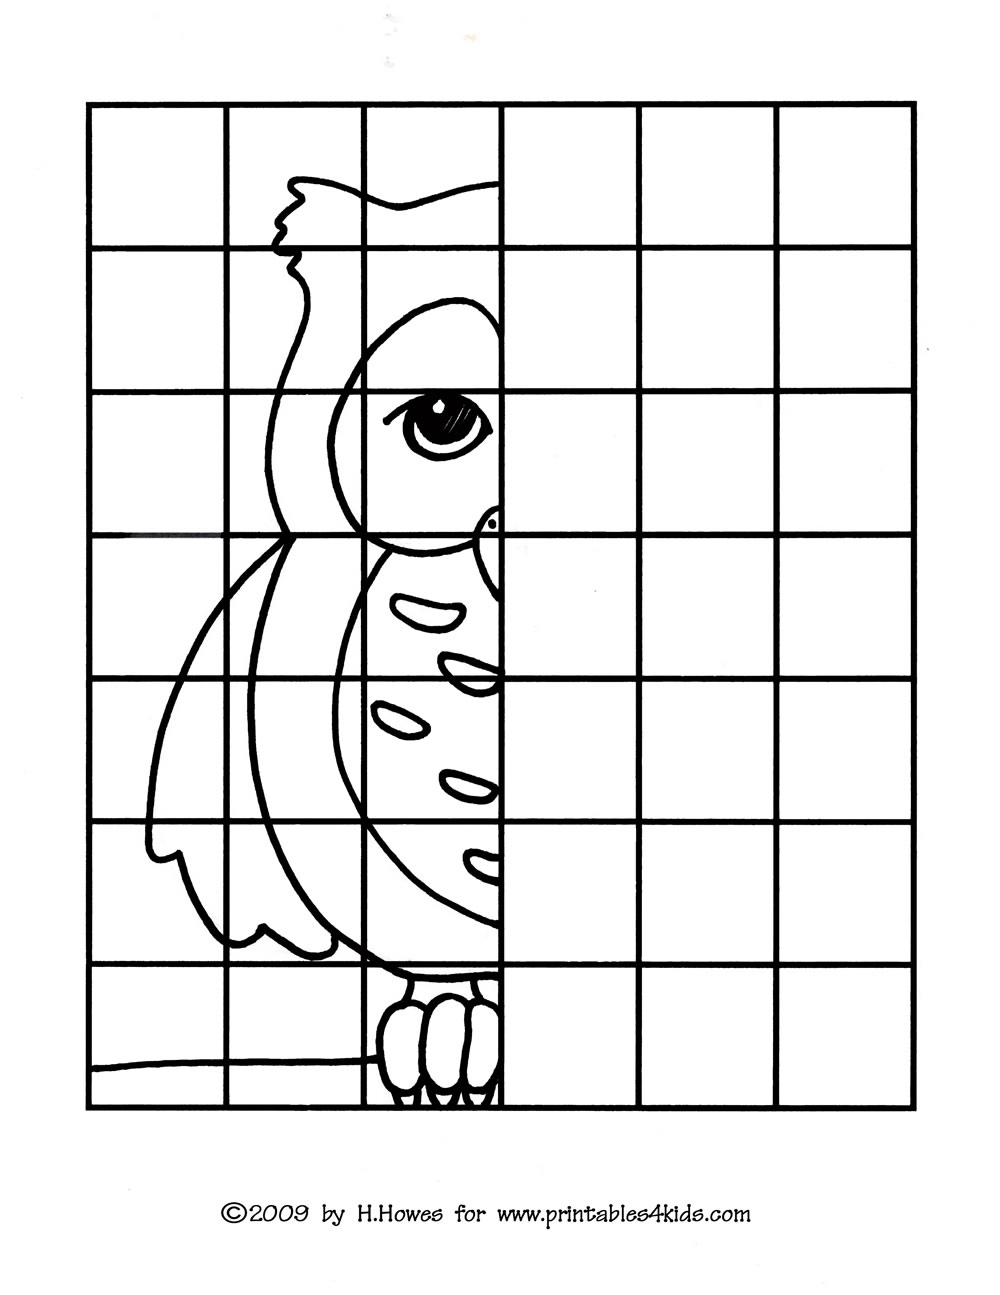 owl-complete-the-picture-drawing-printables-for-kids-free-word